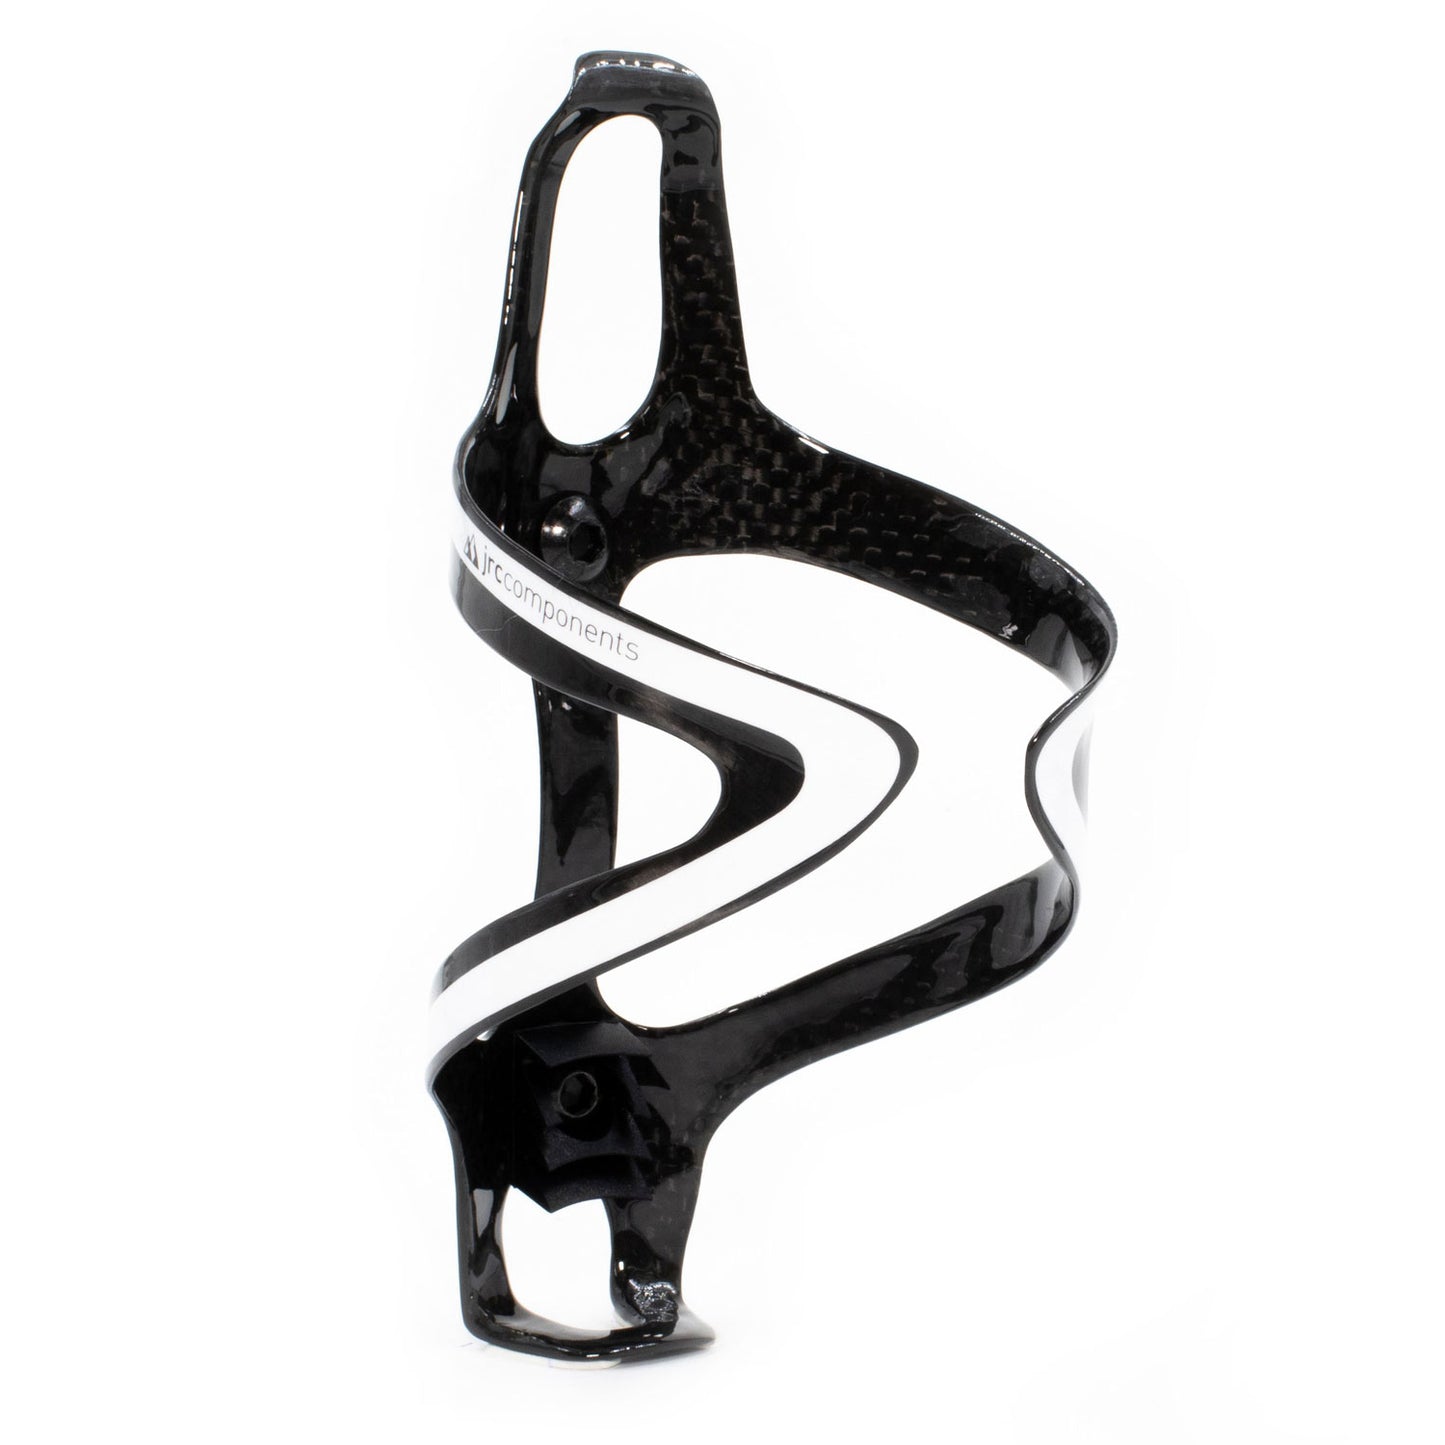 White, super lightweight carbon fibre bottle cages with a sleek gloss finish